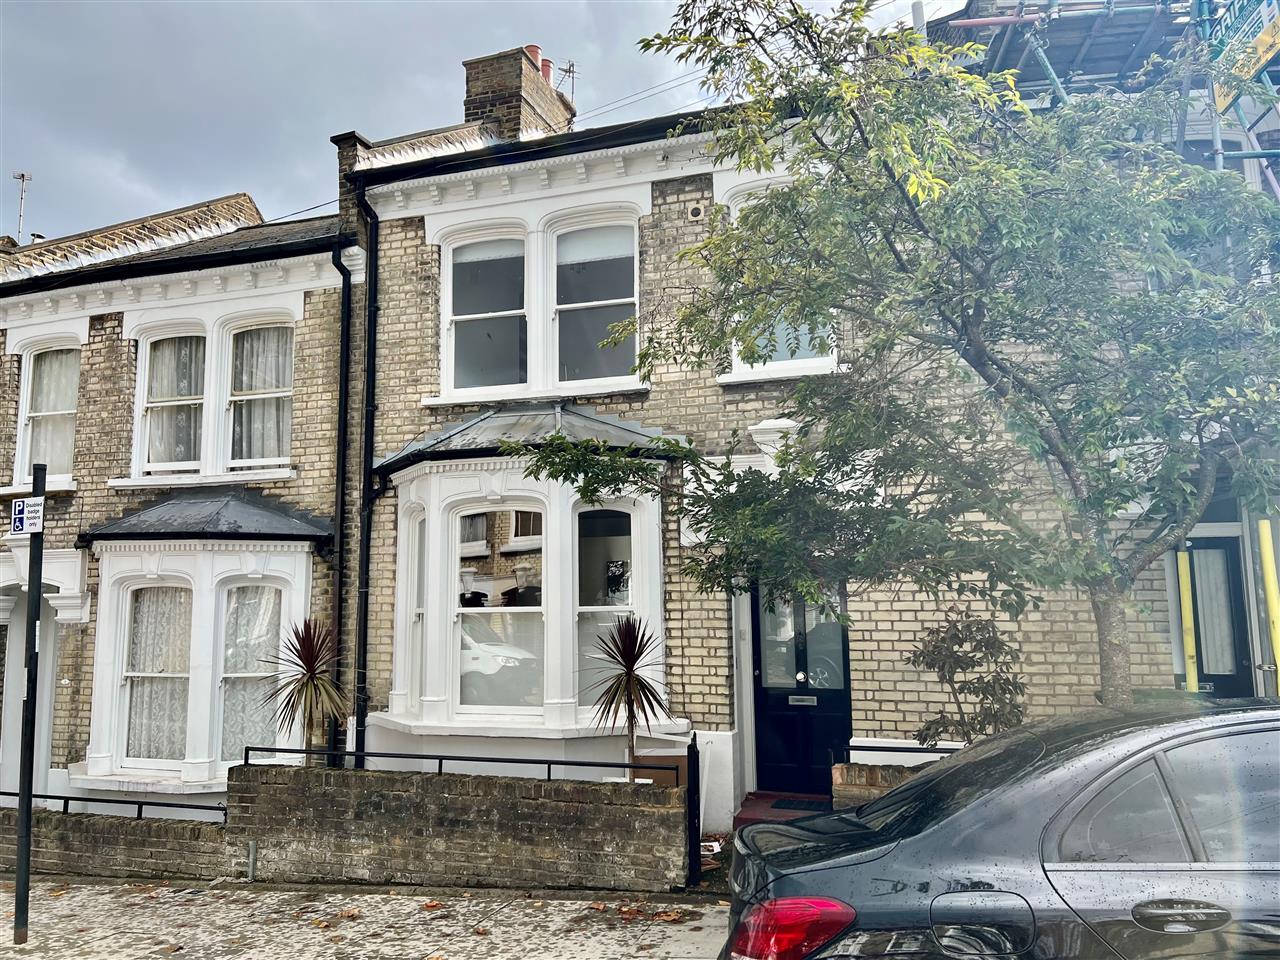 AVAILABLE IMMEDIATELY! A rare opportunity to rent this delightful period house in a sought after turning close to Archway underground station (Northern Line) and the variety of shops, bars and restaurants on Junction Road.. The accommodation comprises of two double bedrooms, open plan ...